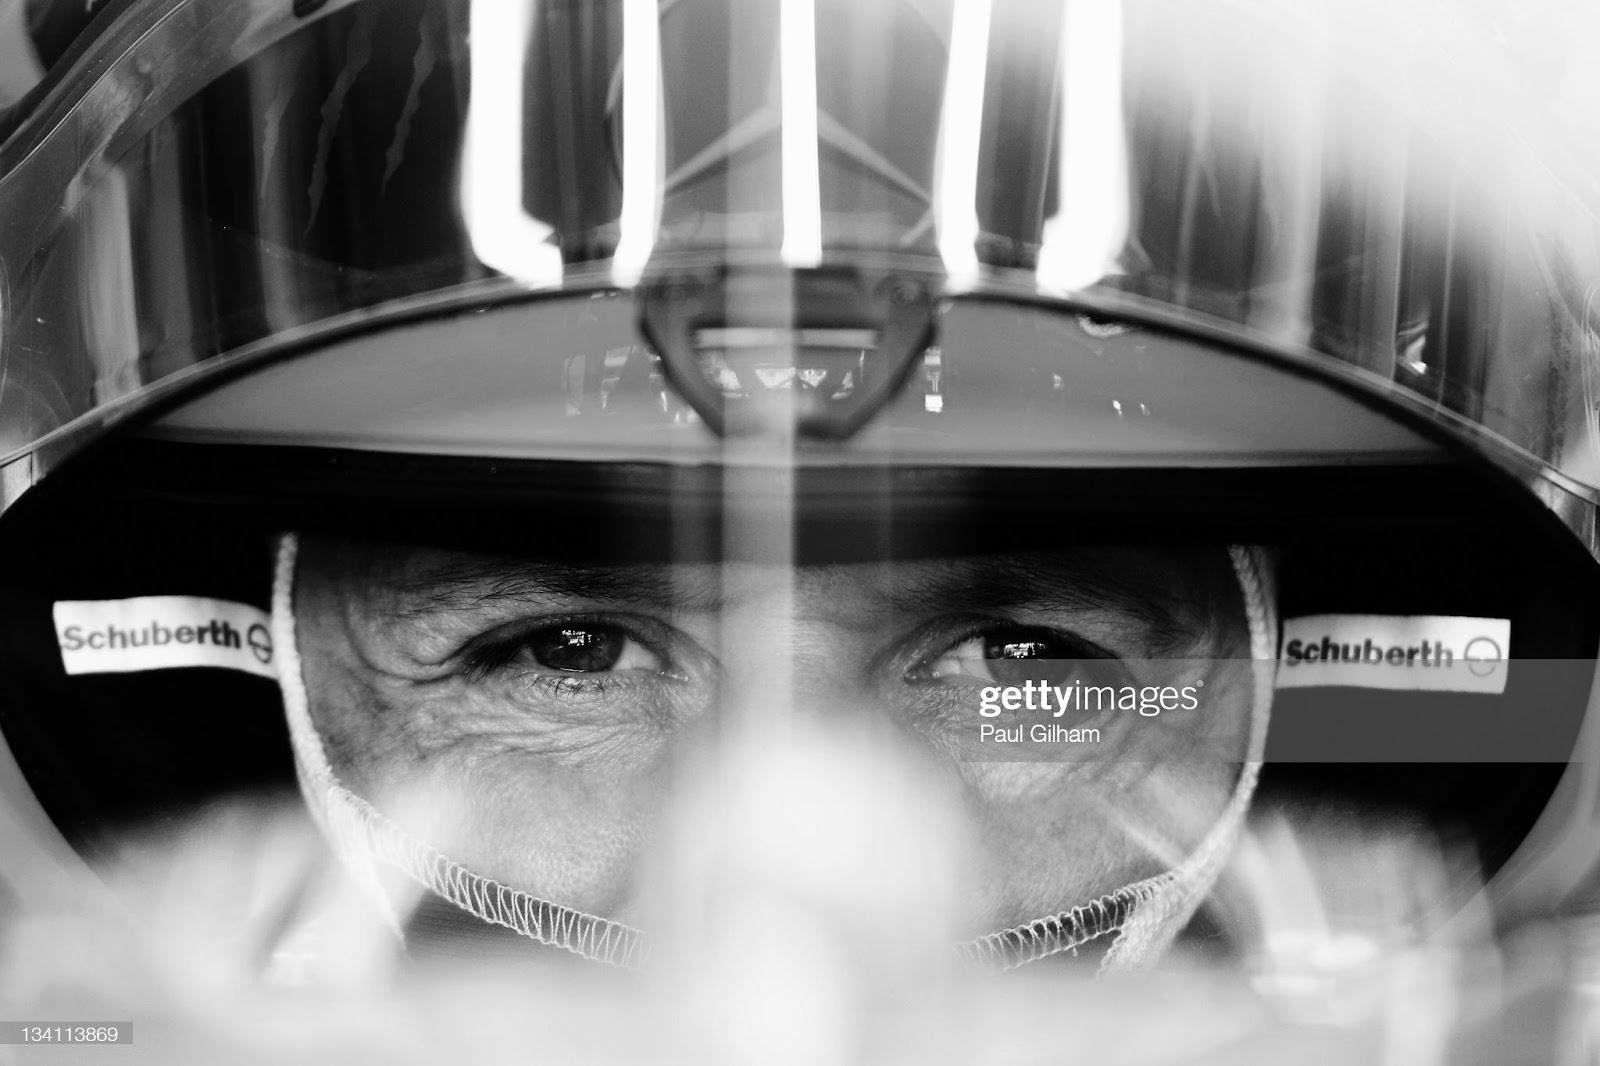 Michael Schumacher, Mercedes GP, prepares to drive during the final practice session prior to qualifying for the Brazilian F1 Grand Prix at the Autodromo Jose Carlos Pace on November 26, 2011 in Sao Paulo, Brazil. 